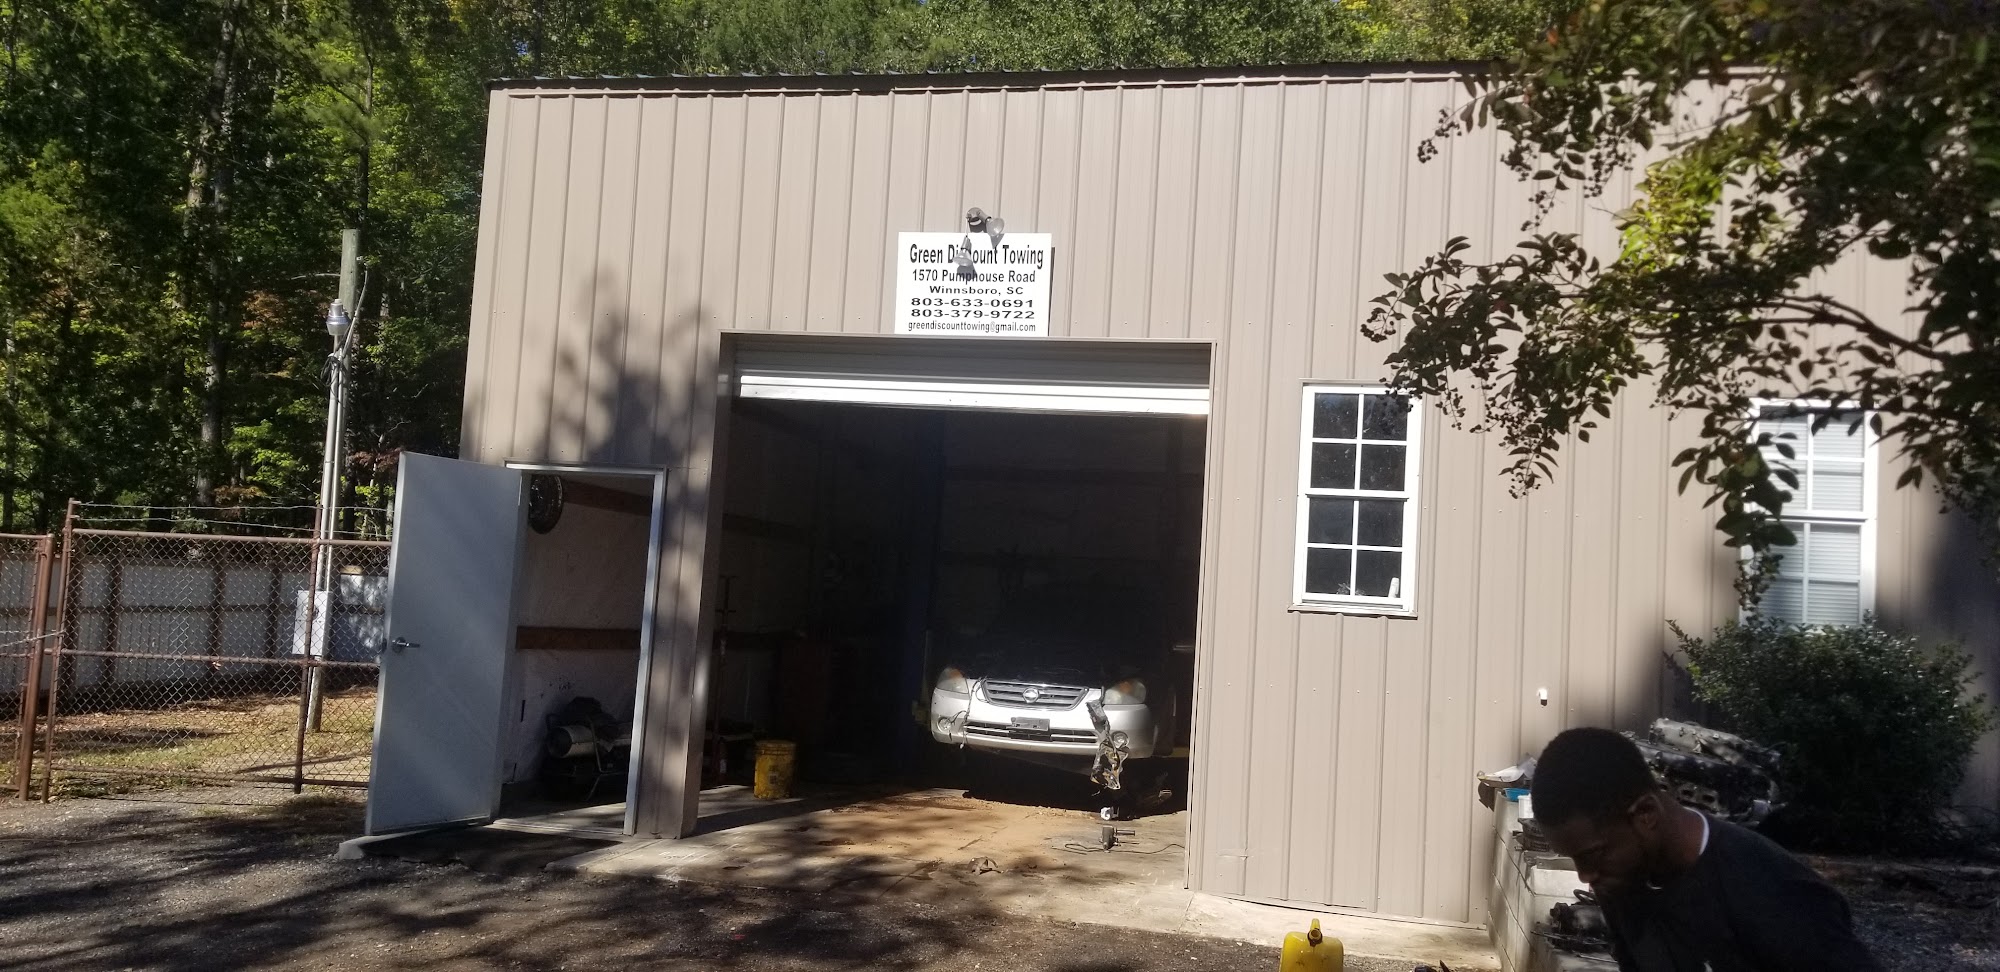 Green Discount Towing and Repairs